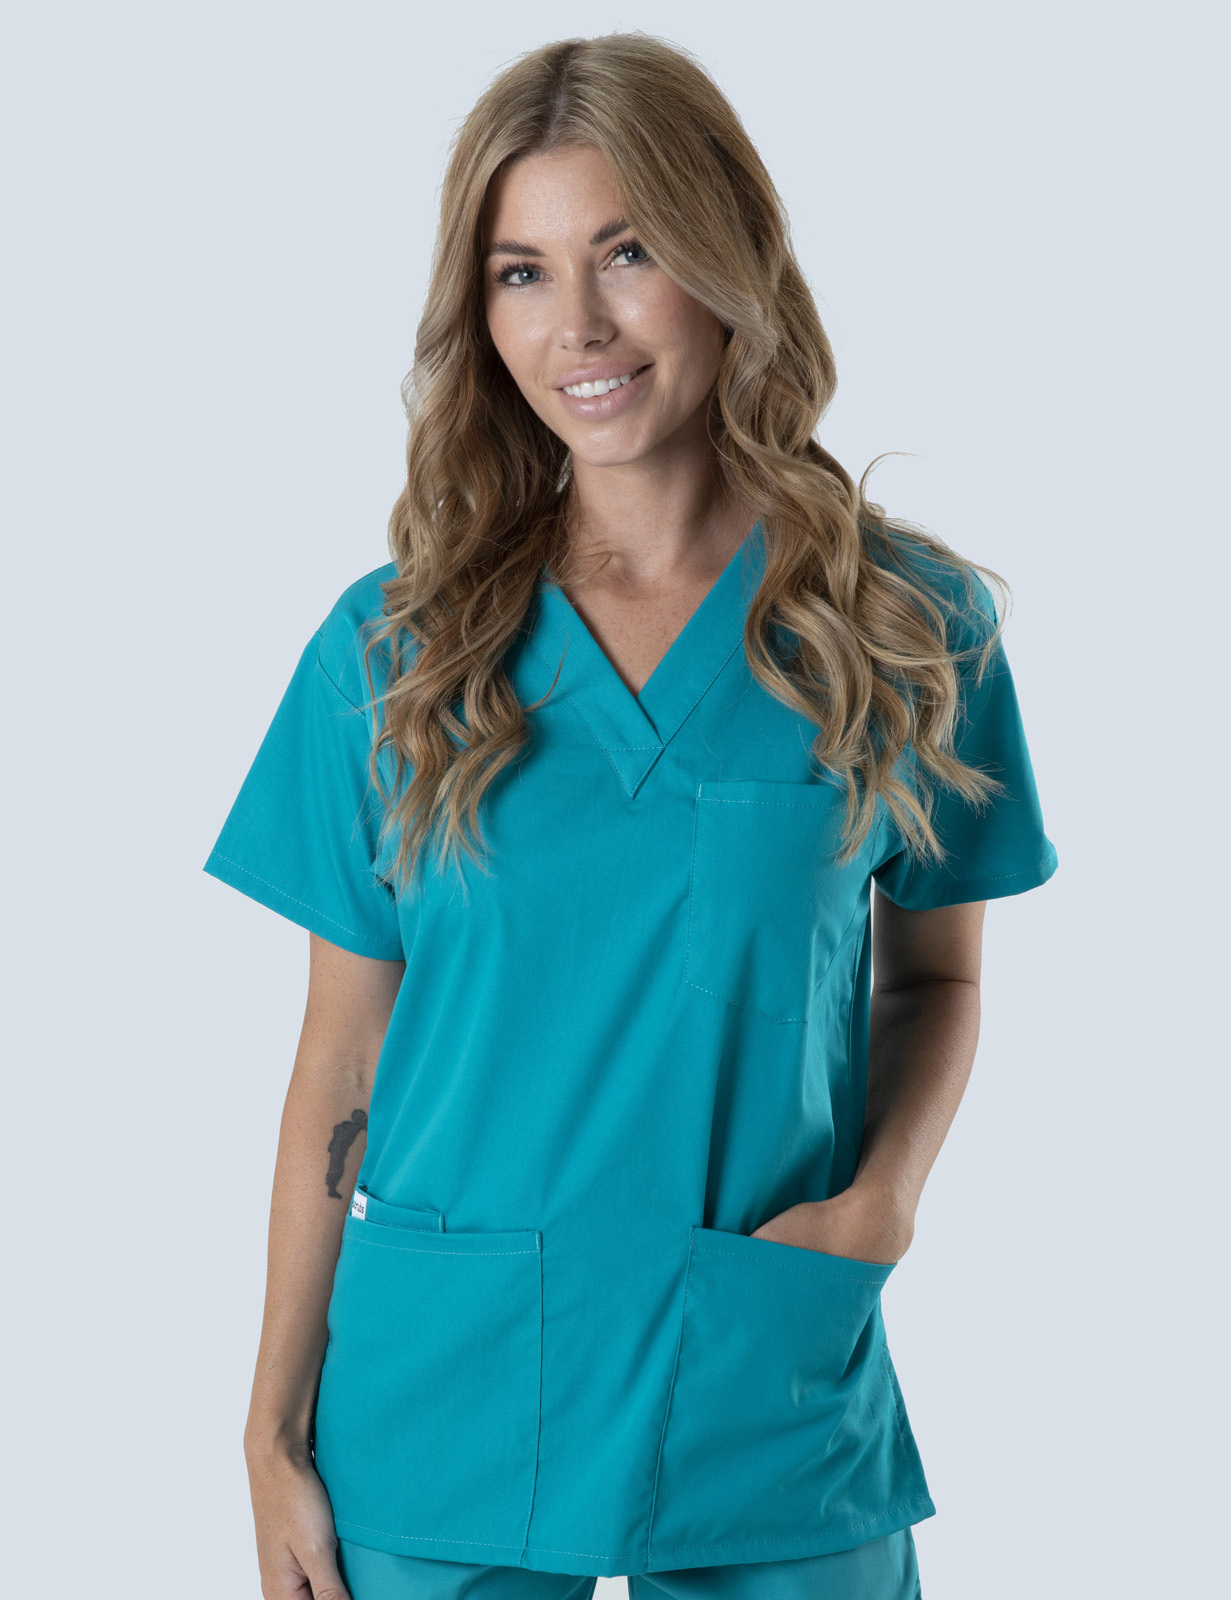 Gold Coast University Hospital - Midwife (4 Pocket Scrub Top and Cargo Pants in Teal incl Logos)